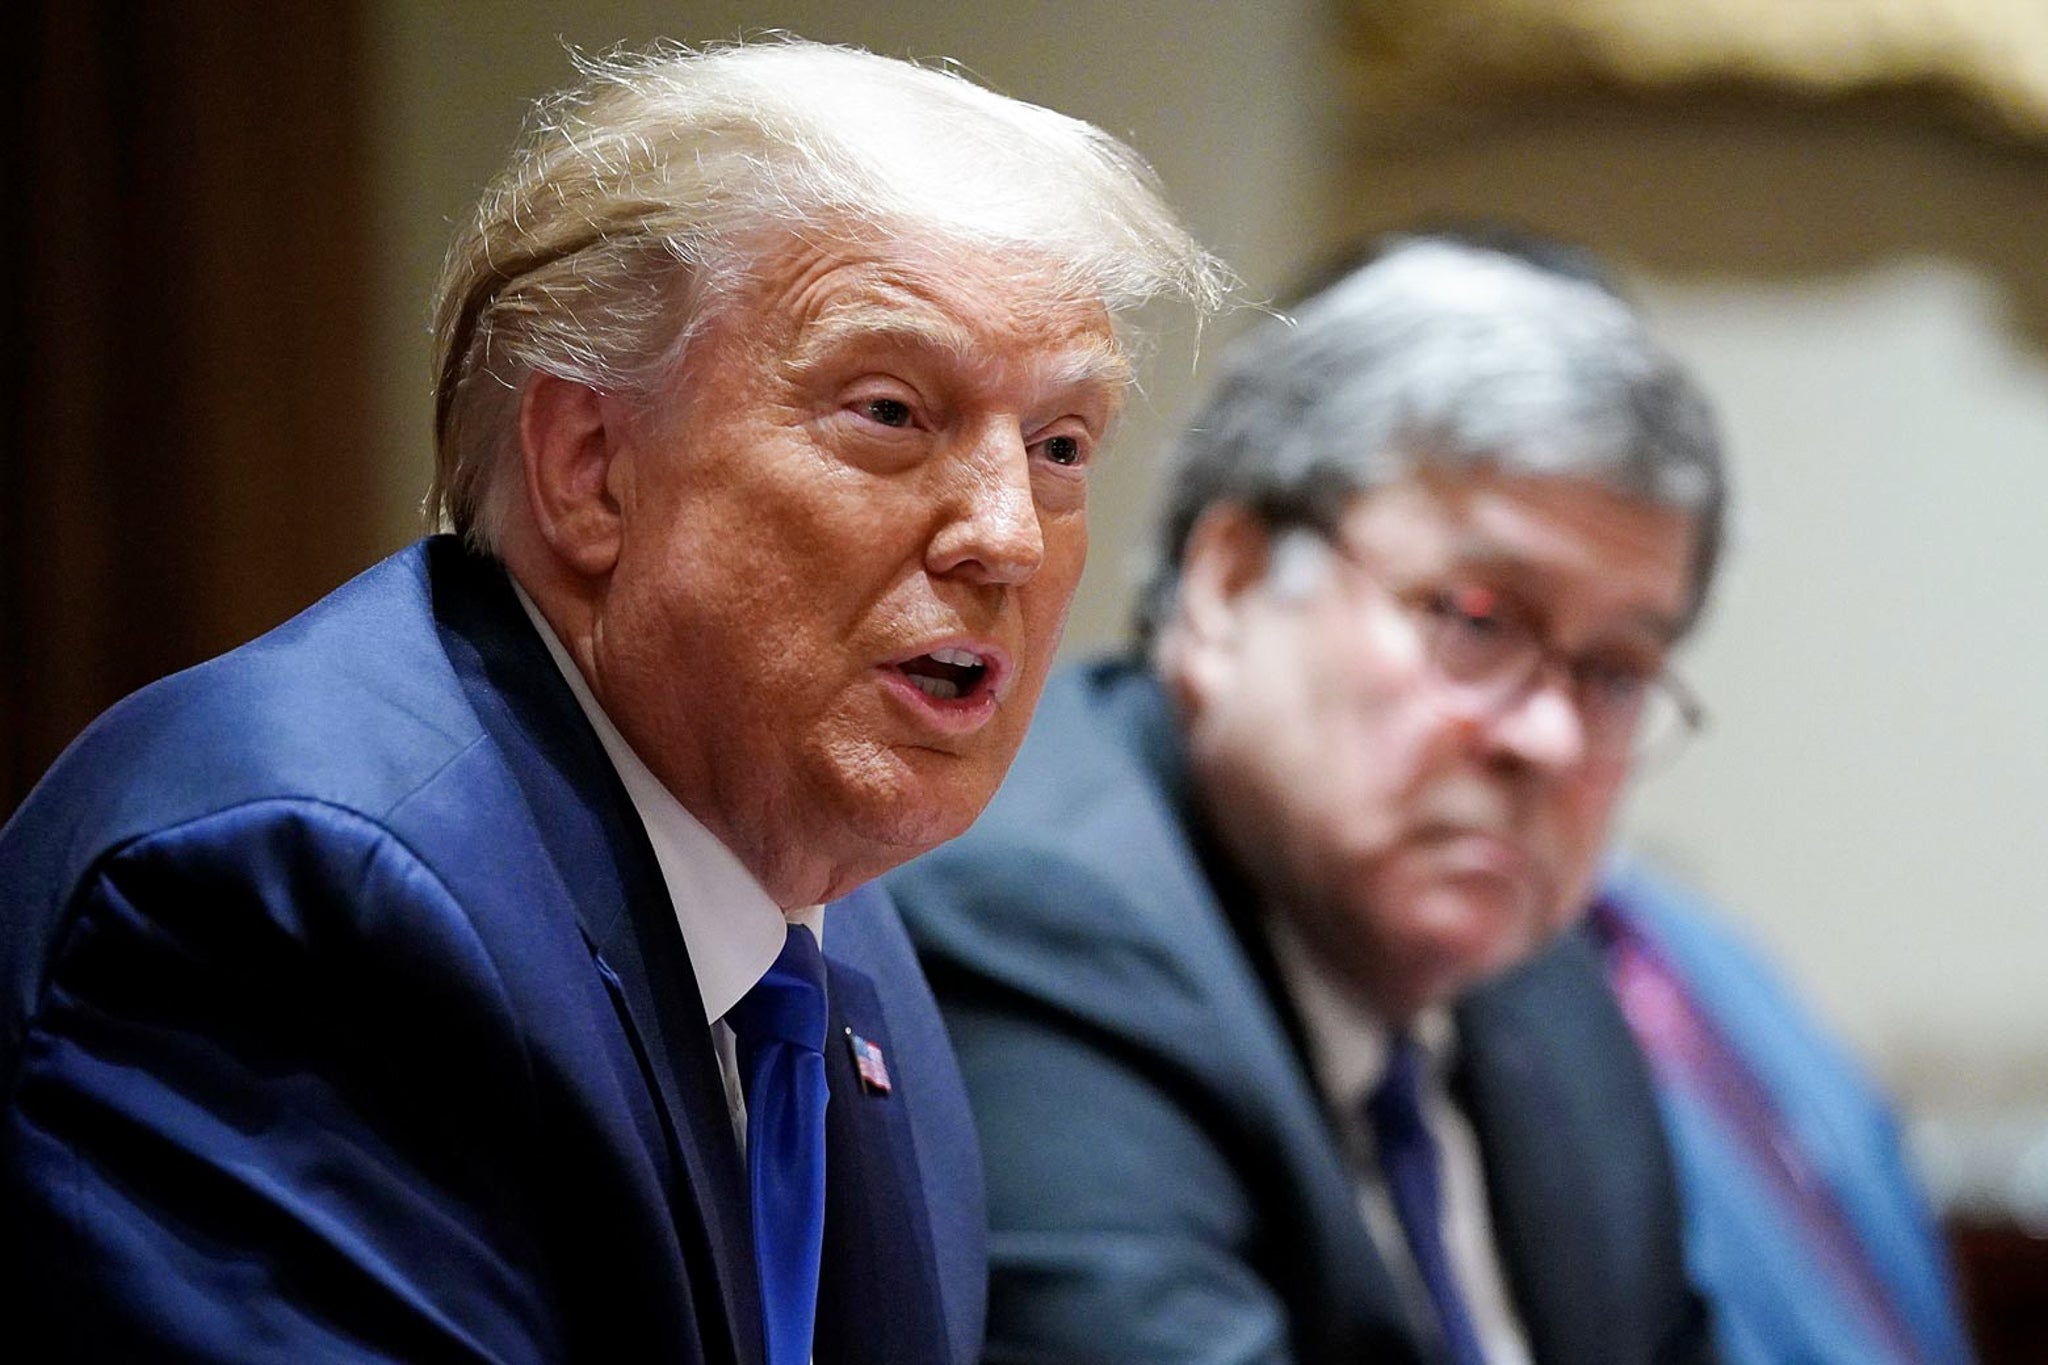 Trump and Barr sit at a table with their hands clasped.